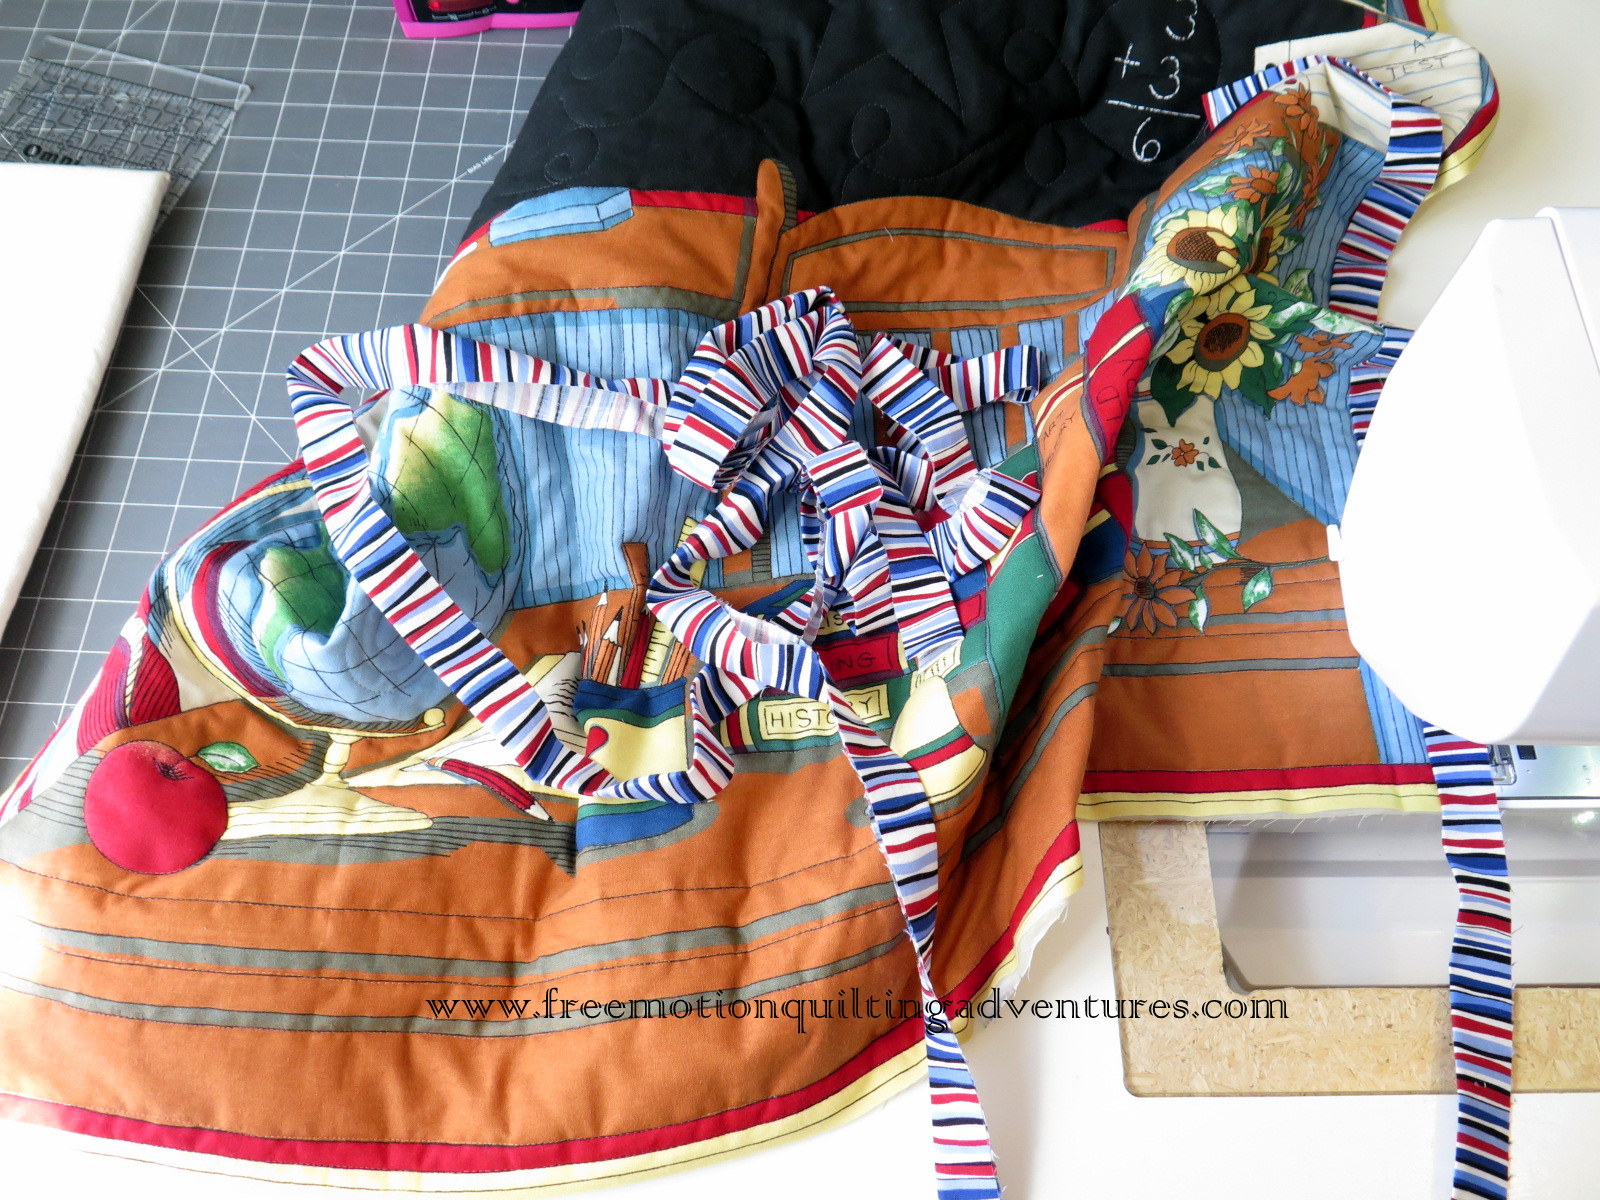 Amy's Free Motion Quilting Adventures: DIY Cone Thread Holder